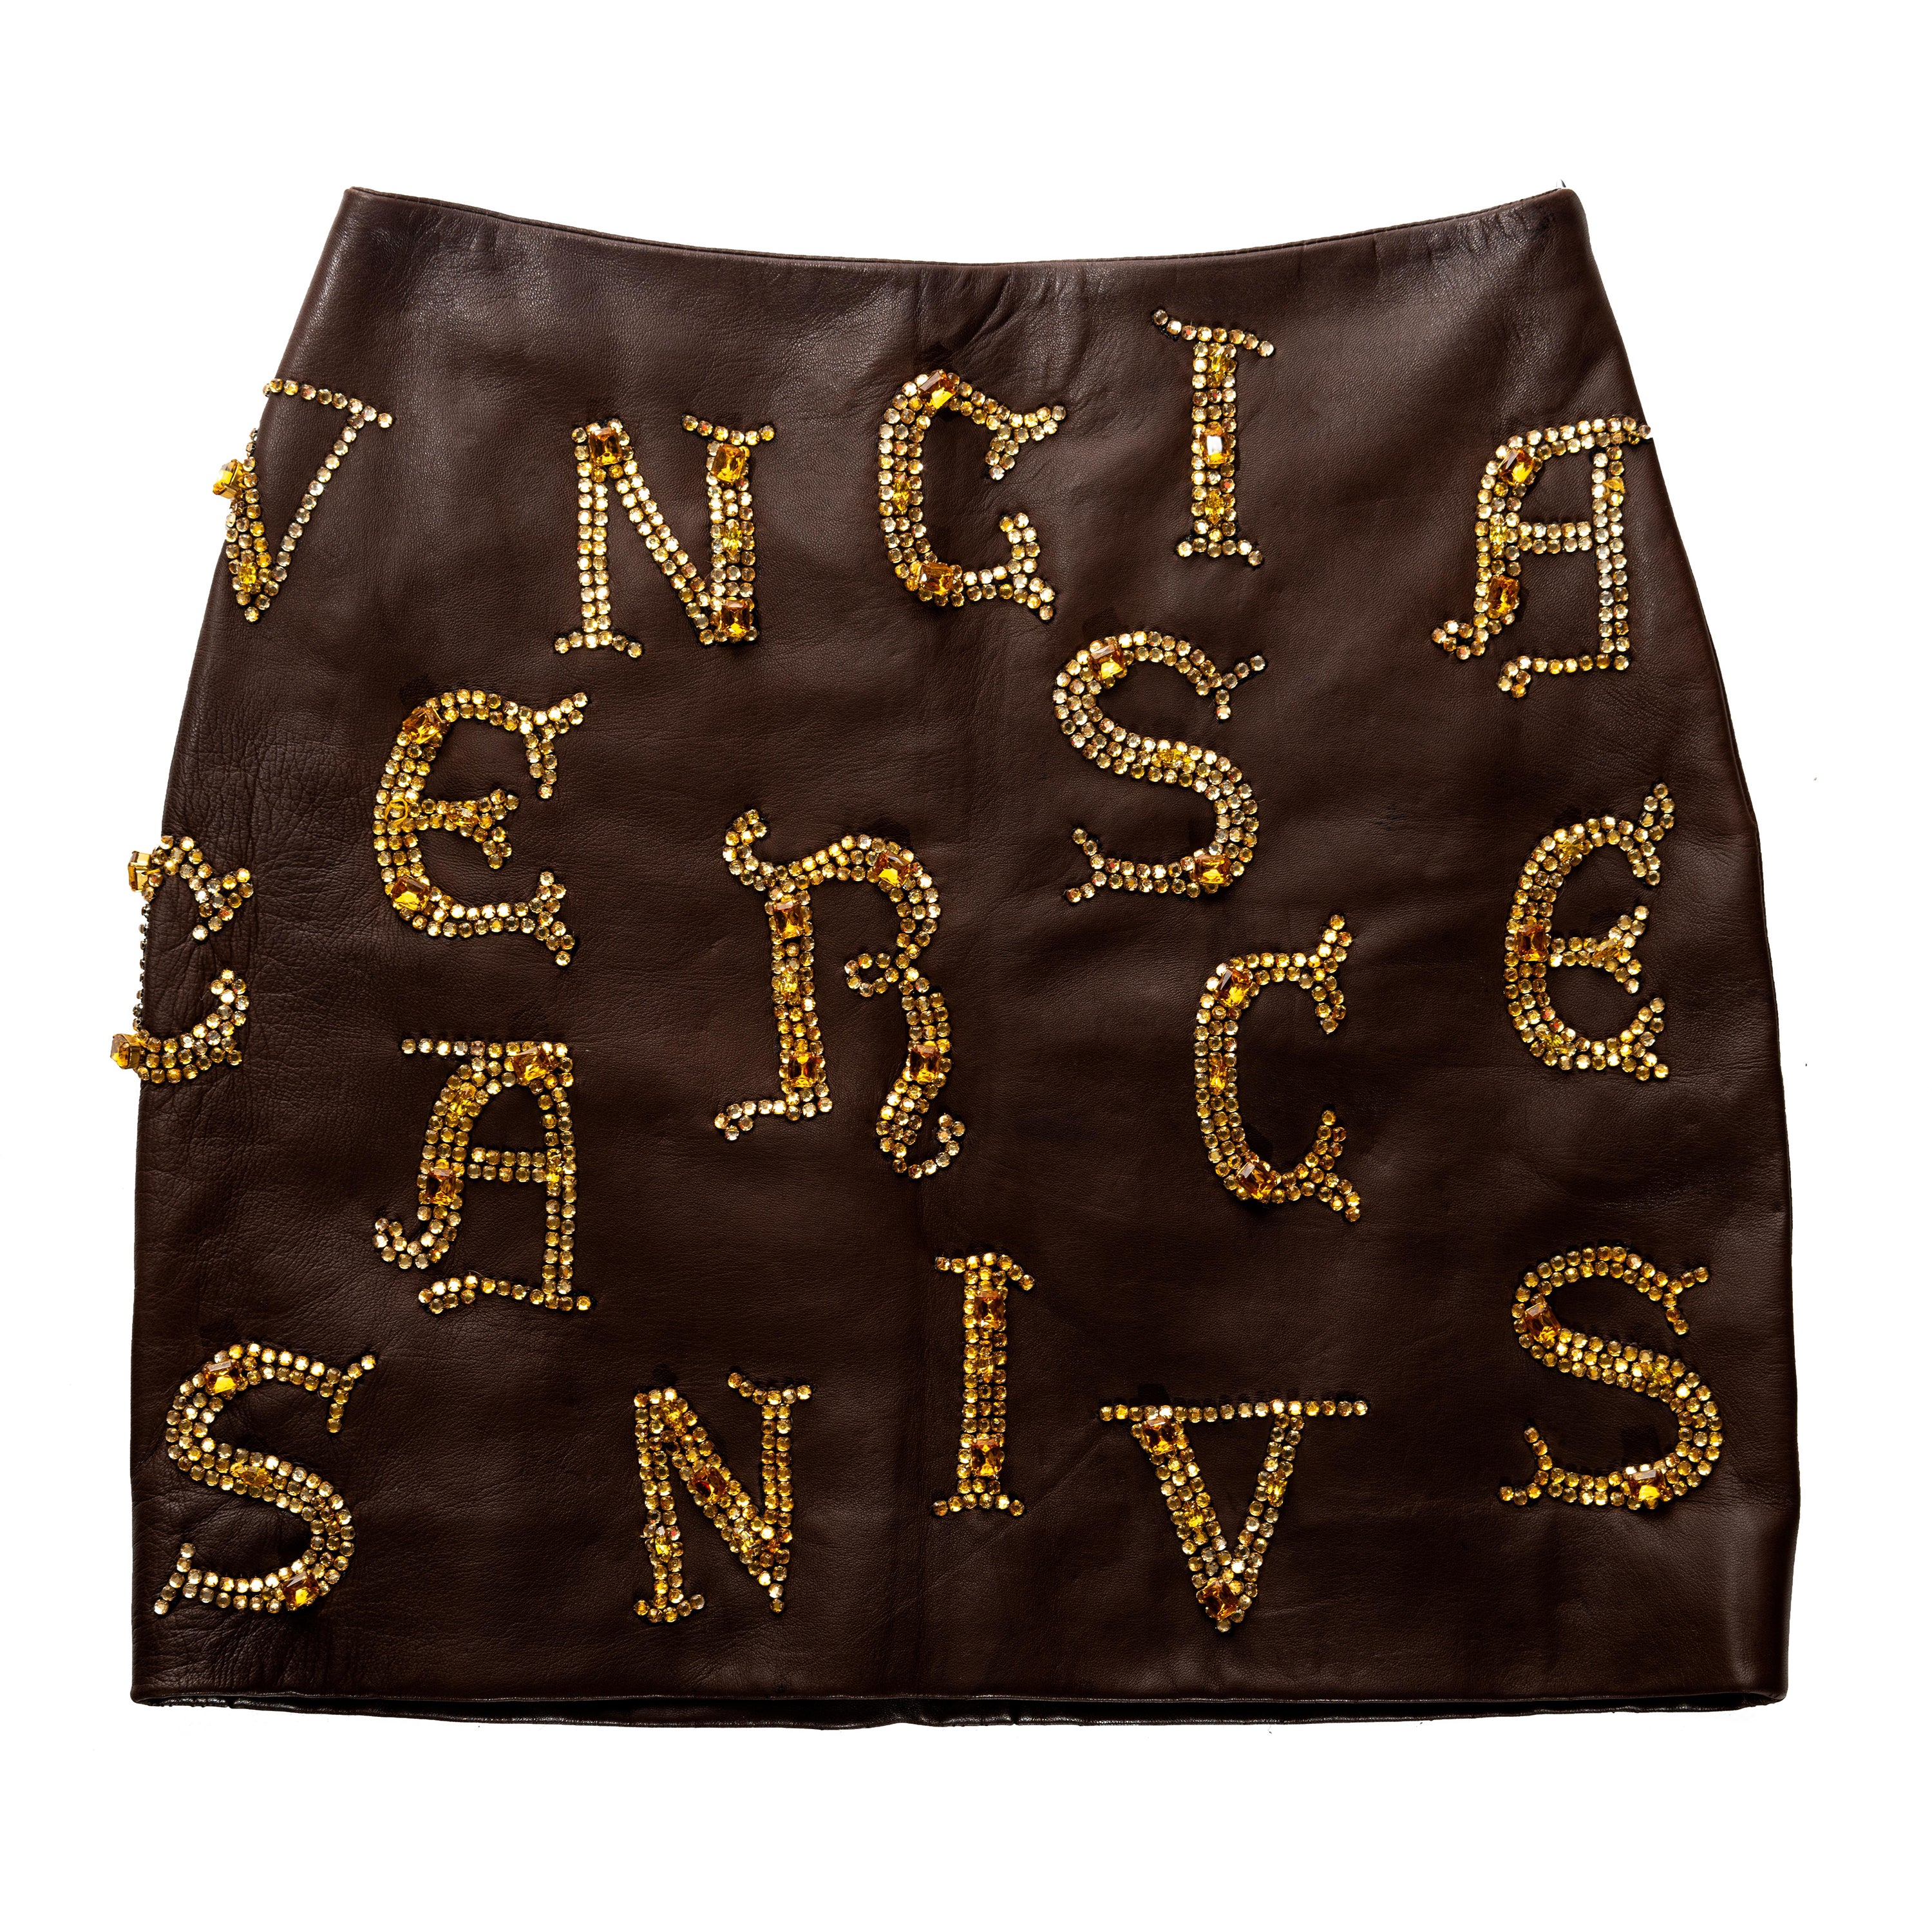 Atelier Versace brown leather skirt with gold crystal calligraphy, fw 1997 For Sale